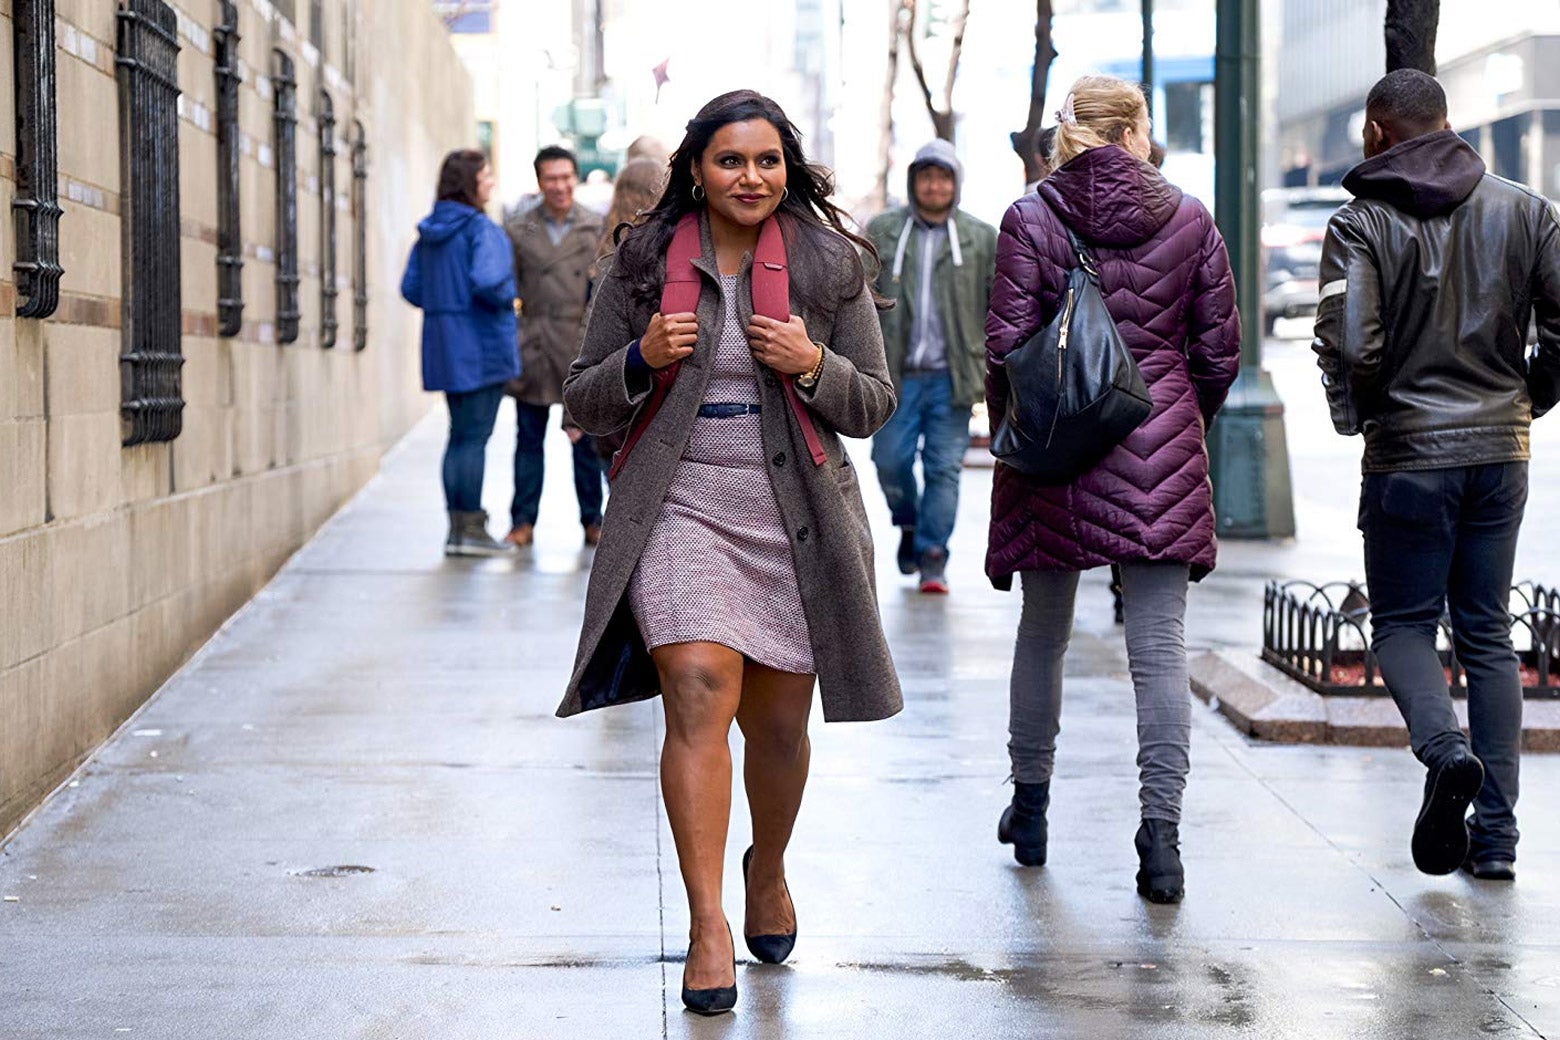 Kaling as Molly Patel, walking down a city street wearing a backpack and smiling excitedly.